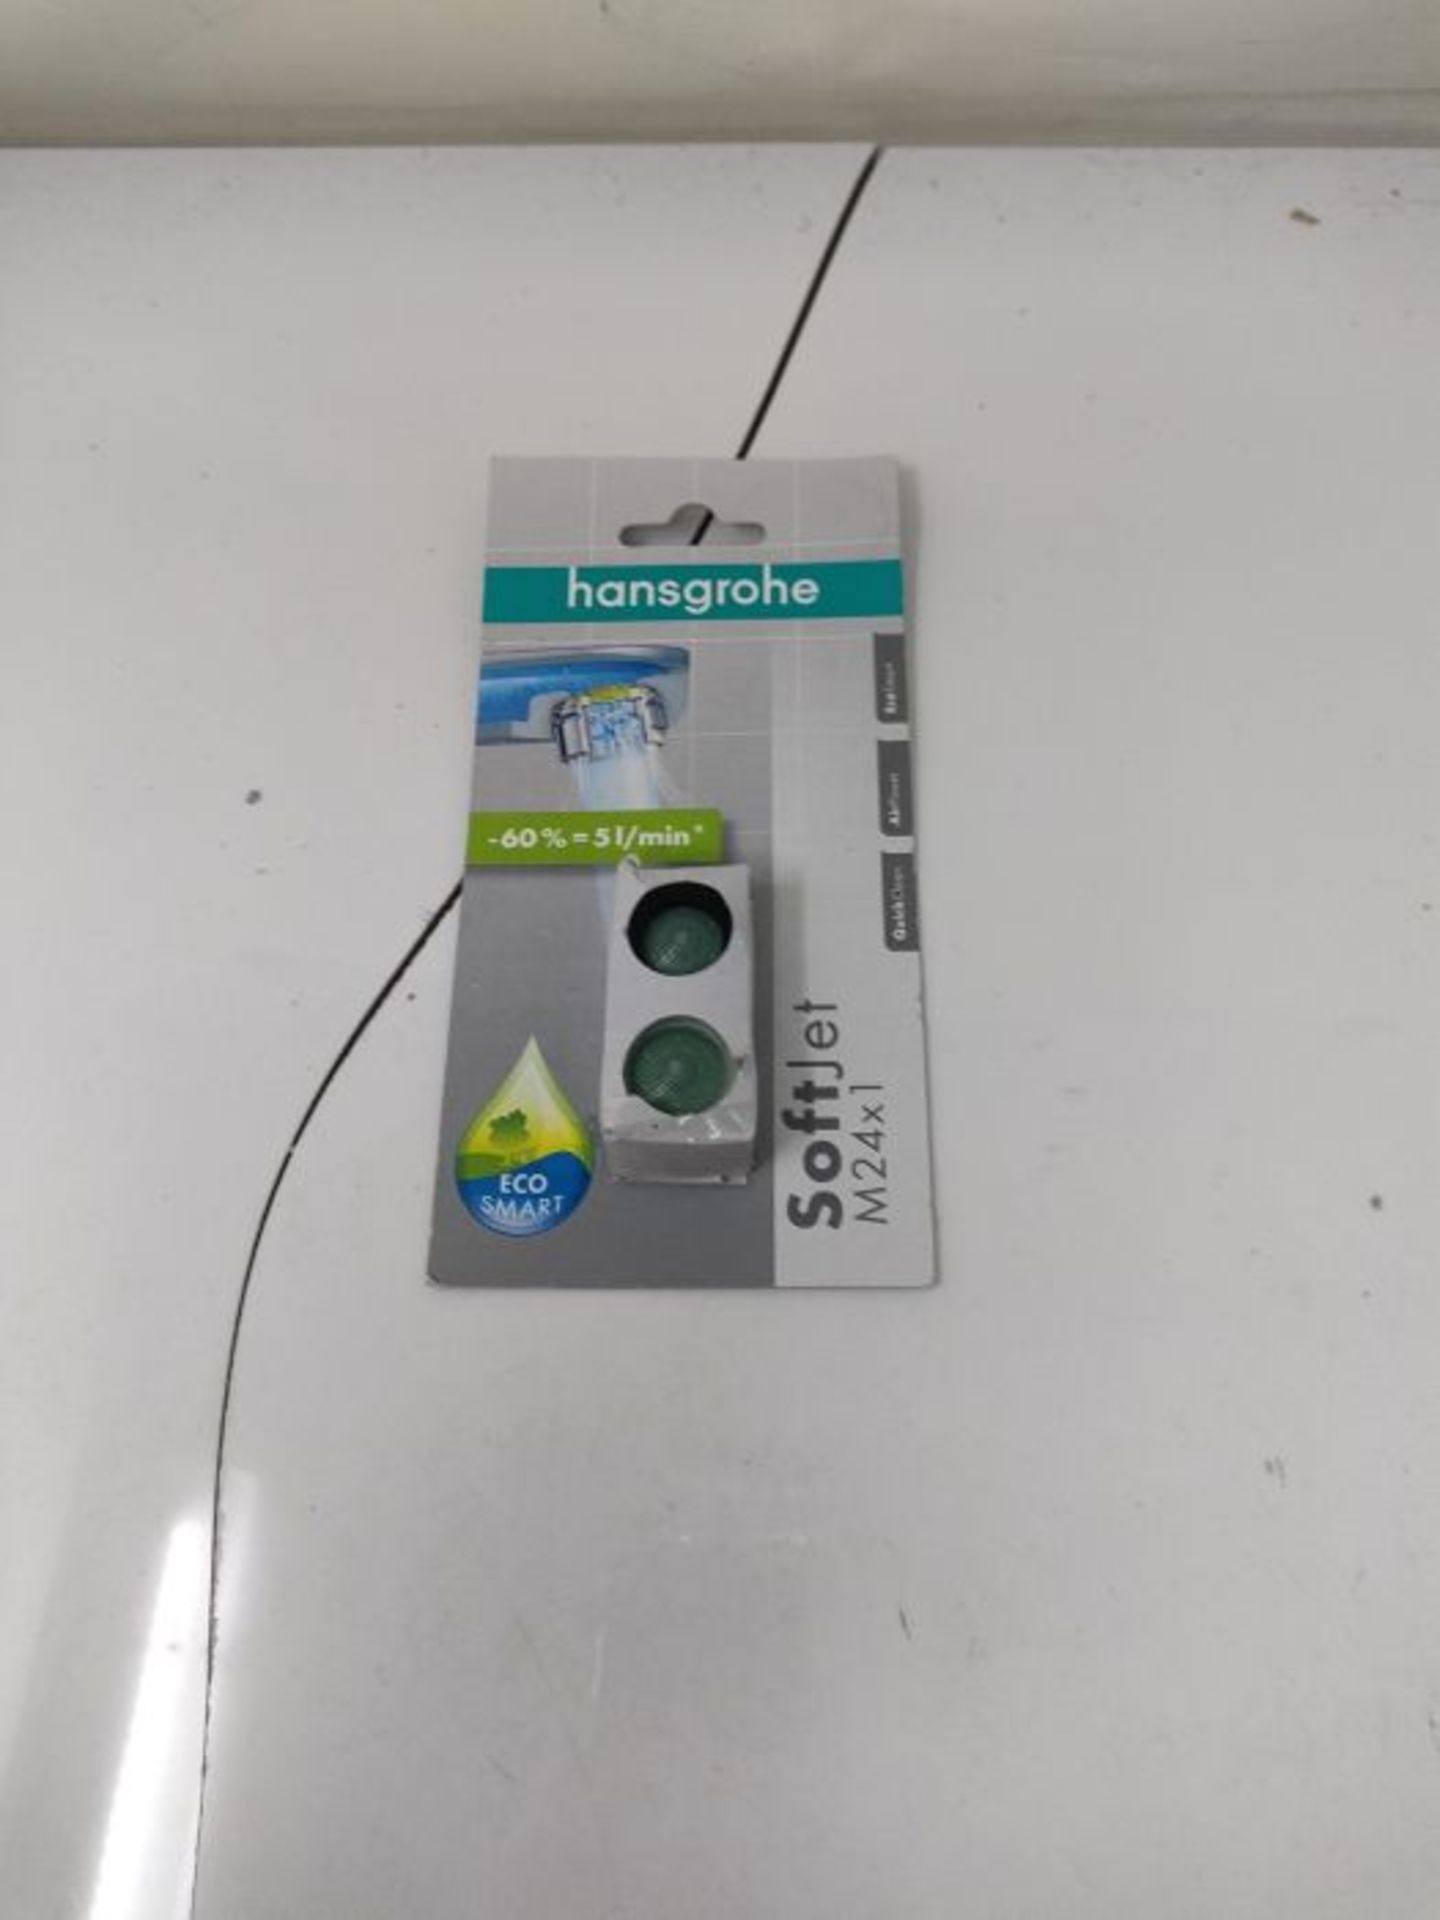 hansgrohe 13182000 SoftJet Aerator Set with Water dimmer 5 l/min Spare Parts, Mulitcol - Image 2 of 3